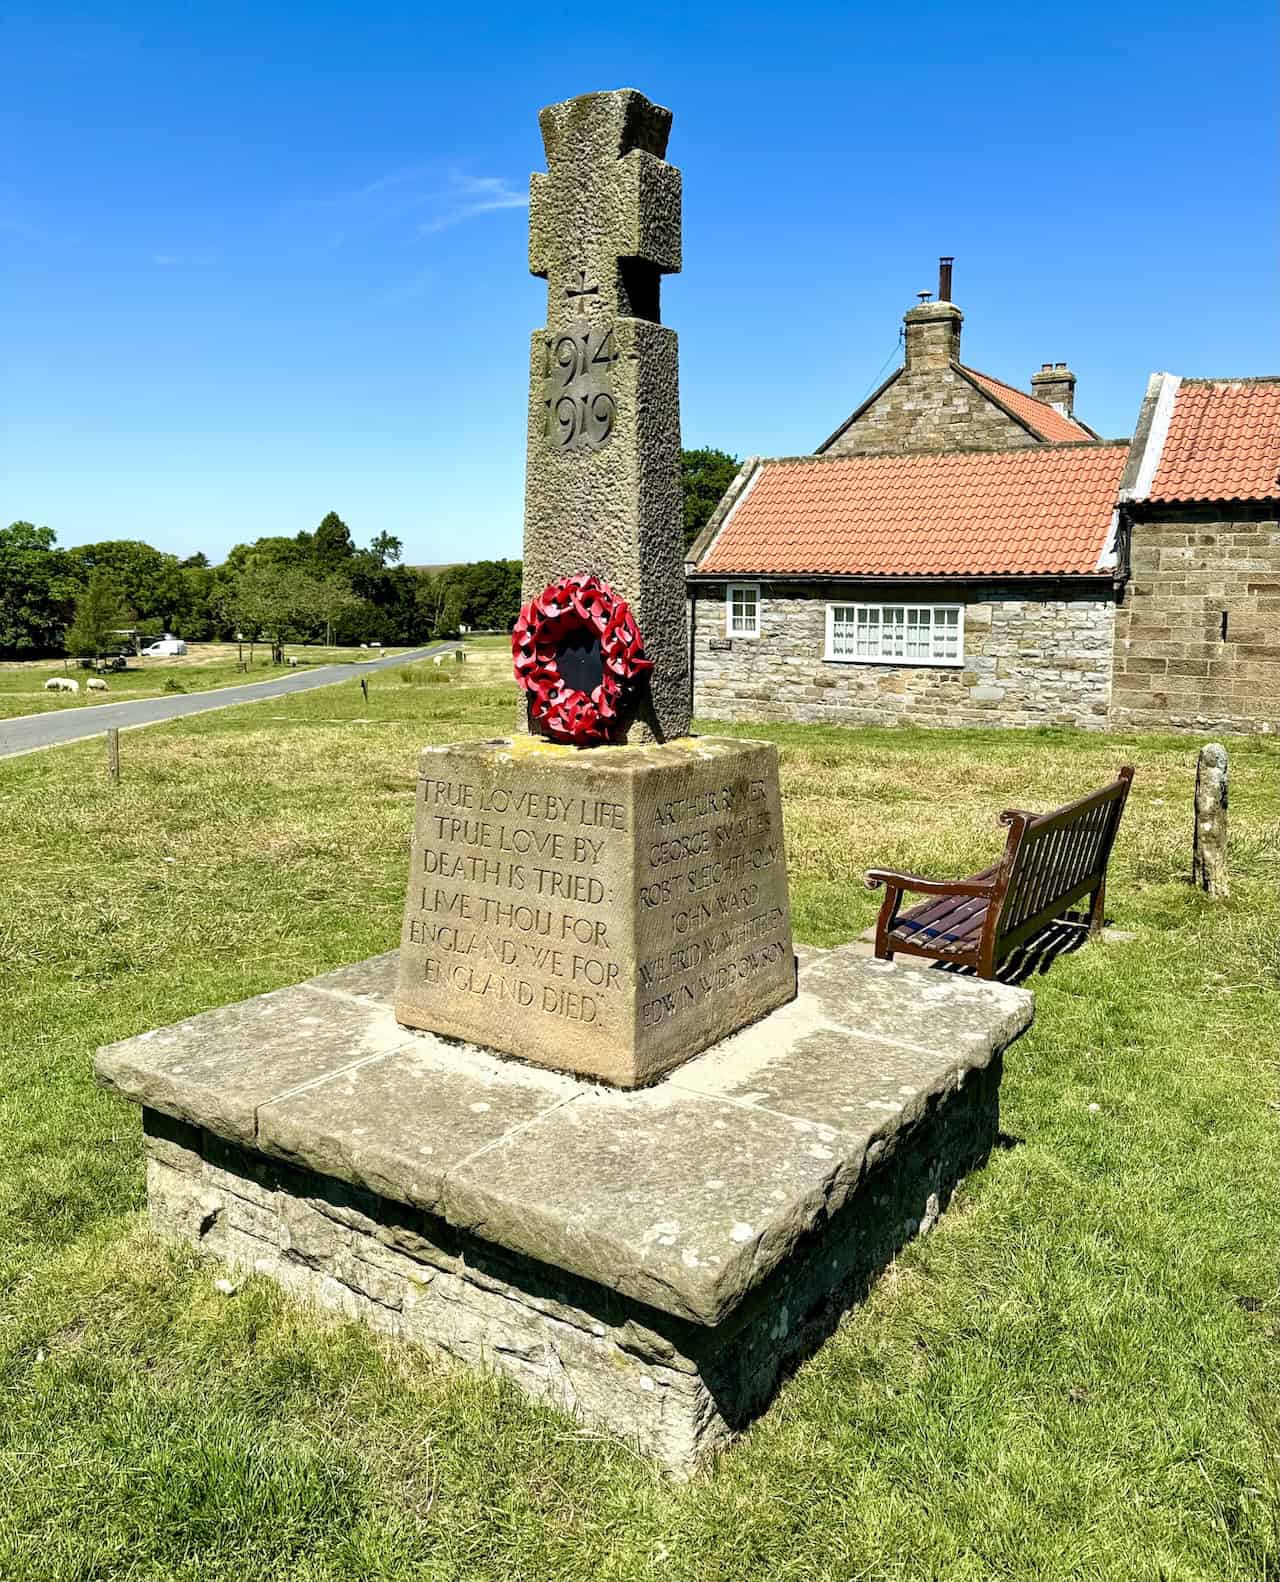 Final photo of the World War I memorial cross on the village green after lunch.